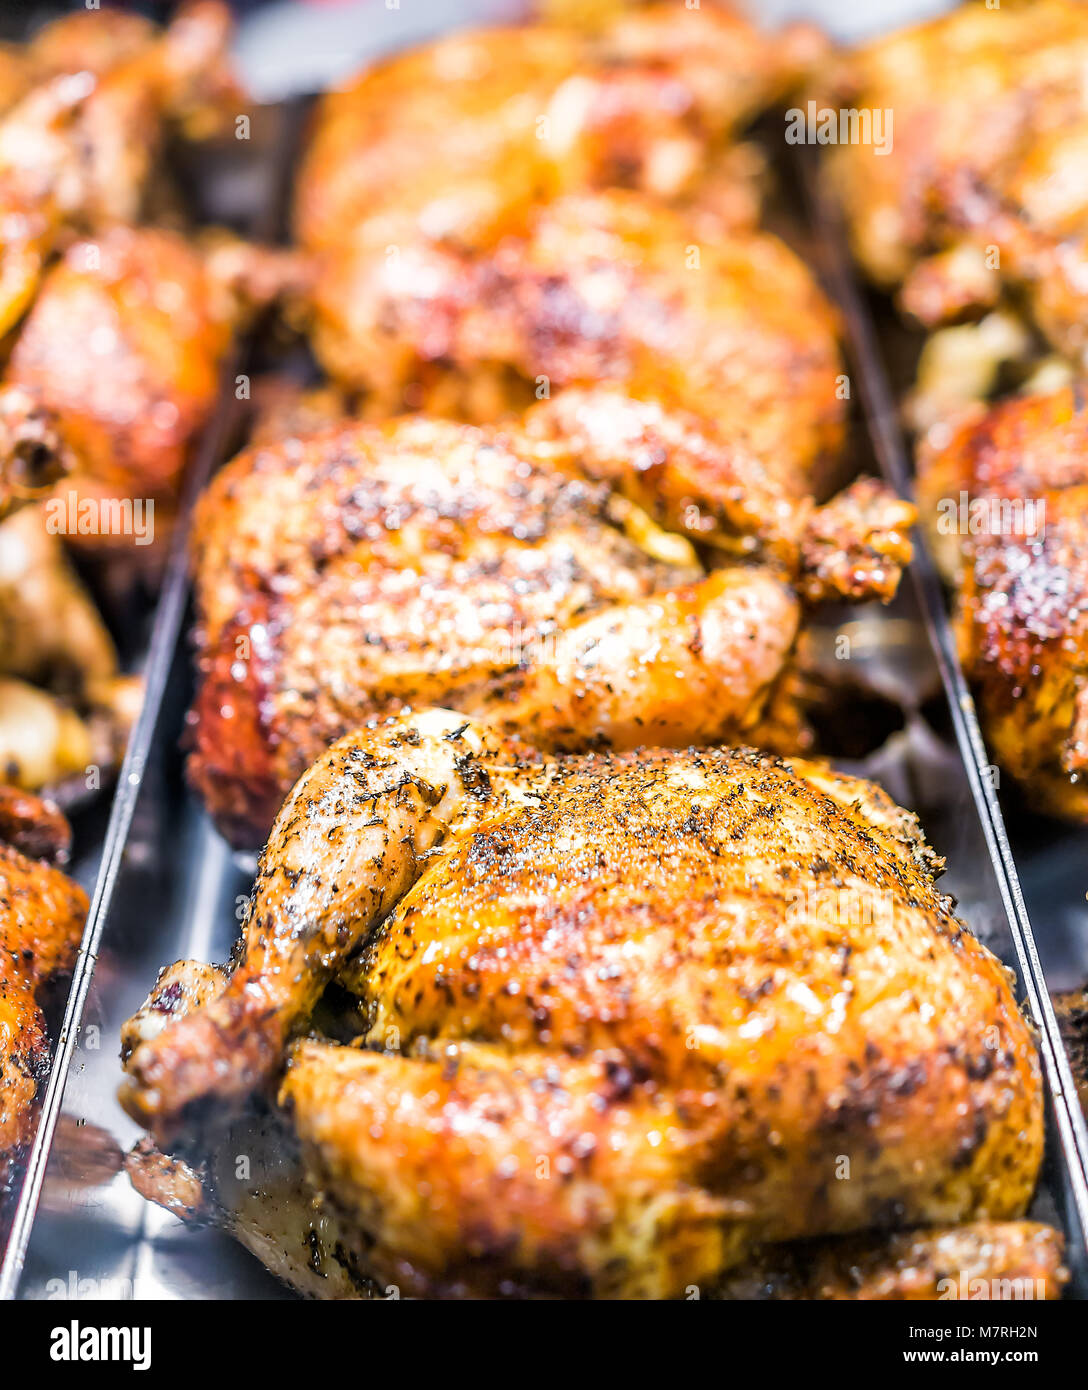 Many roasted whole chicken closeup on tray in deli store shop grocery display brown with herbs, spices, crispy golden skin Stock Photo